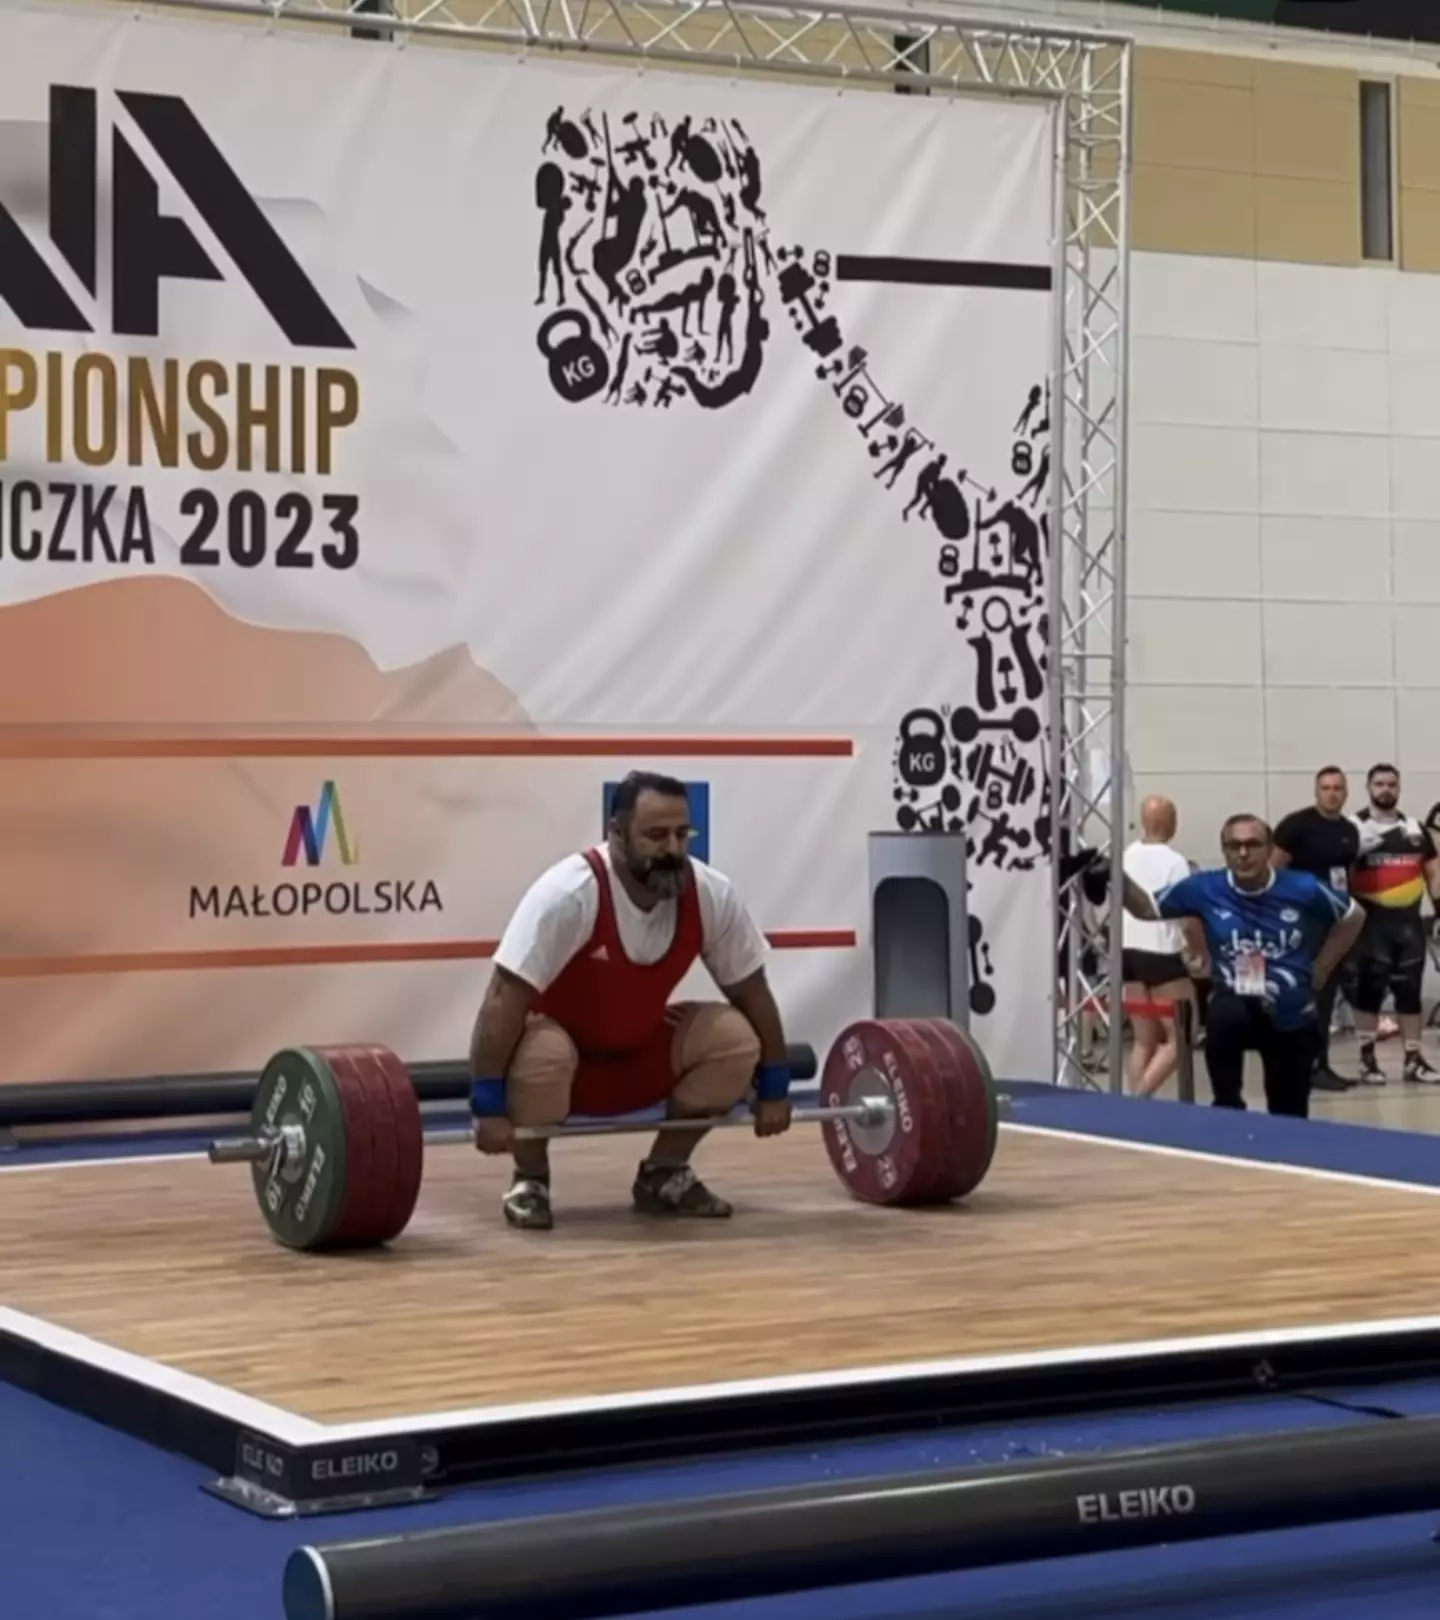 Rajaei took to Instagram to share how challenging his world record had been.